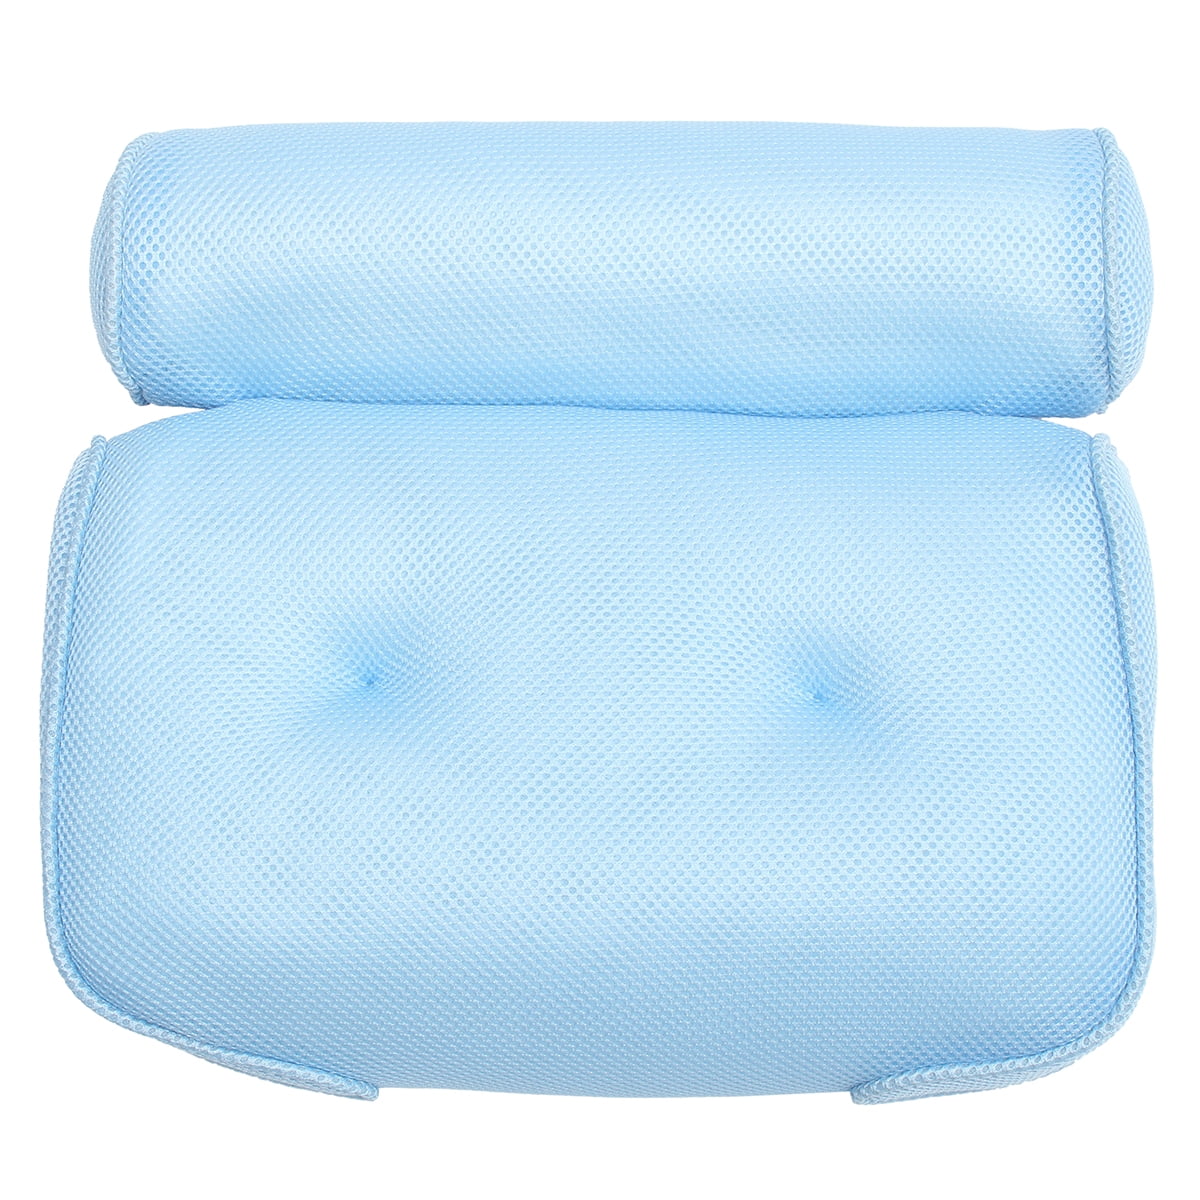 Bath Pillow Hot Tub Pool Suction Cups Neck Support White SOFT 6.5" x 11" 